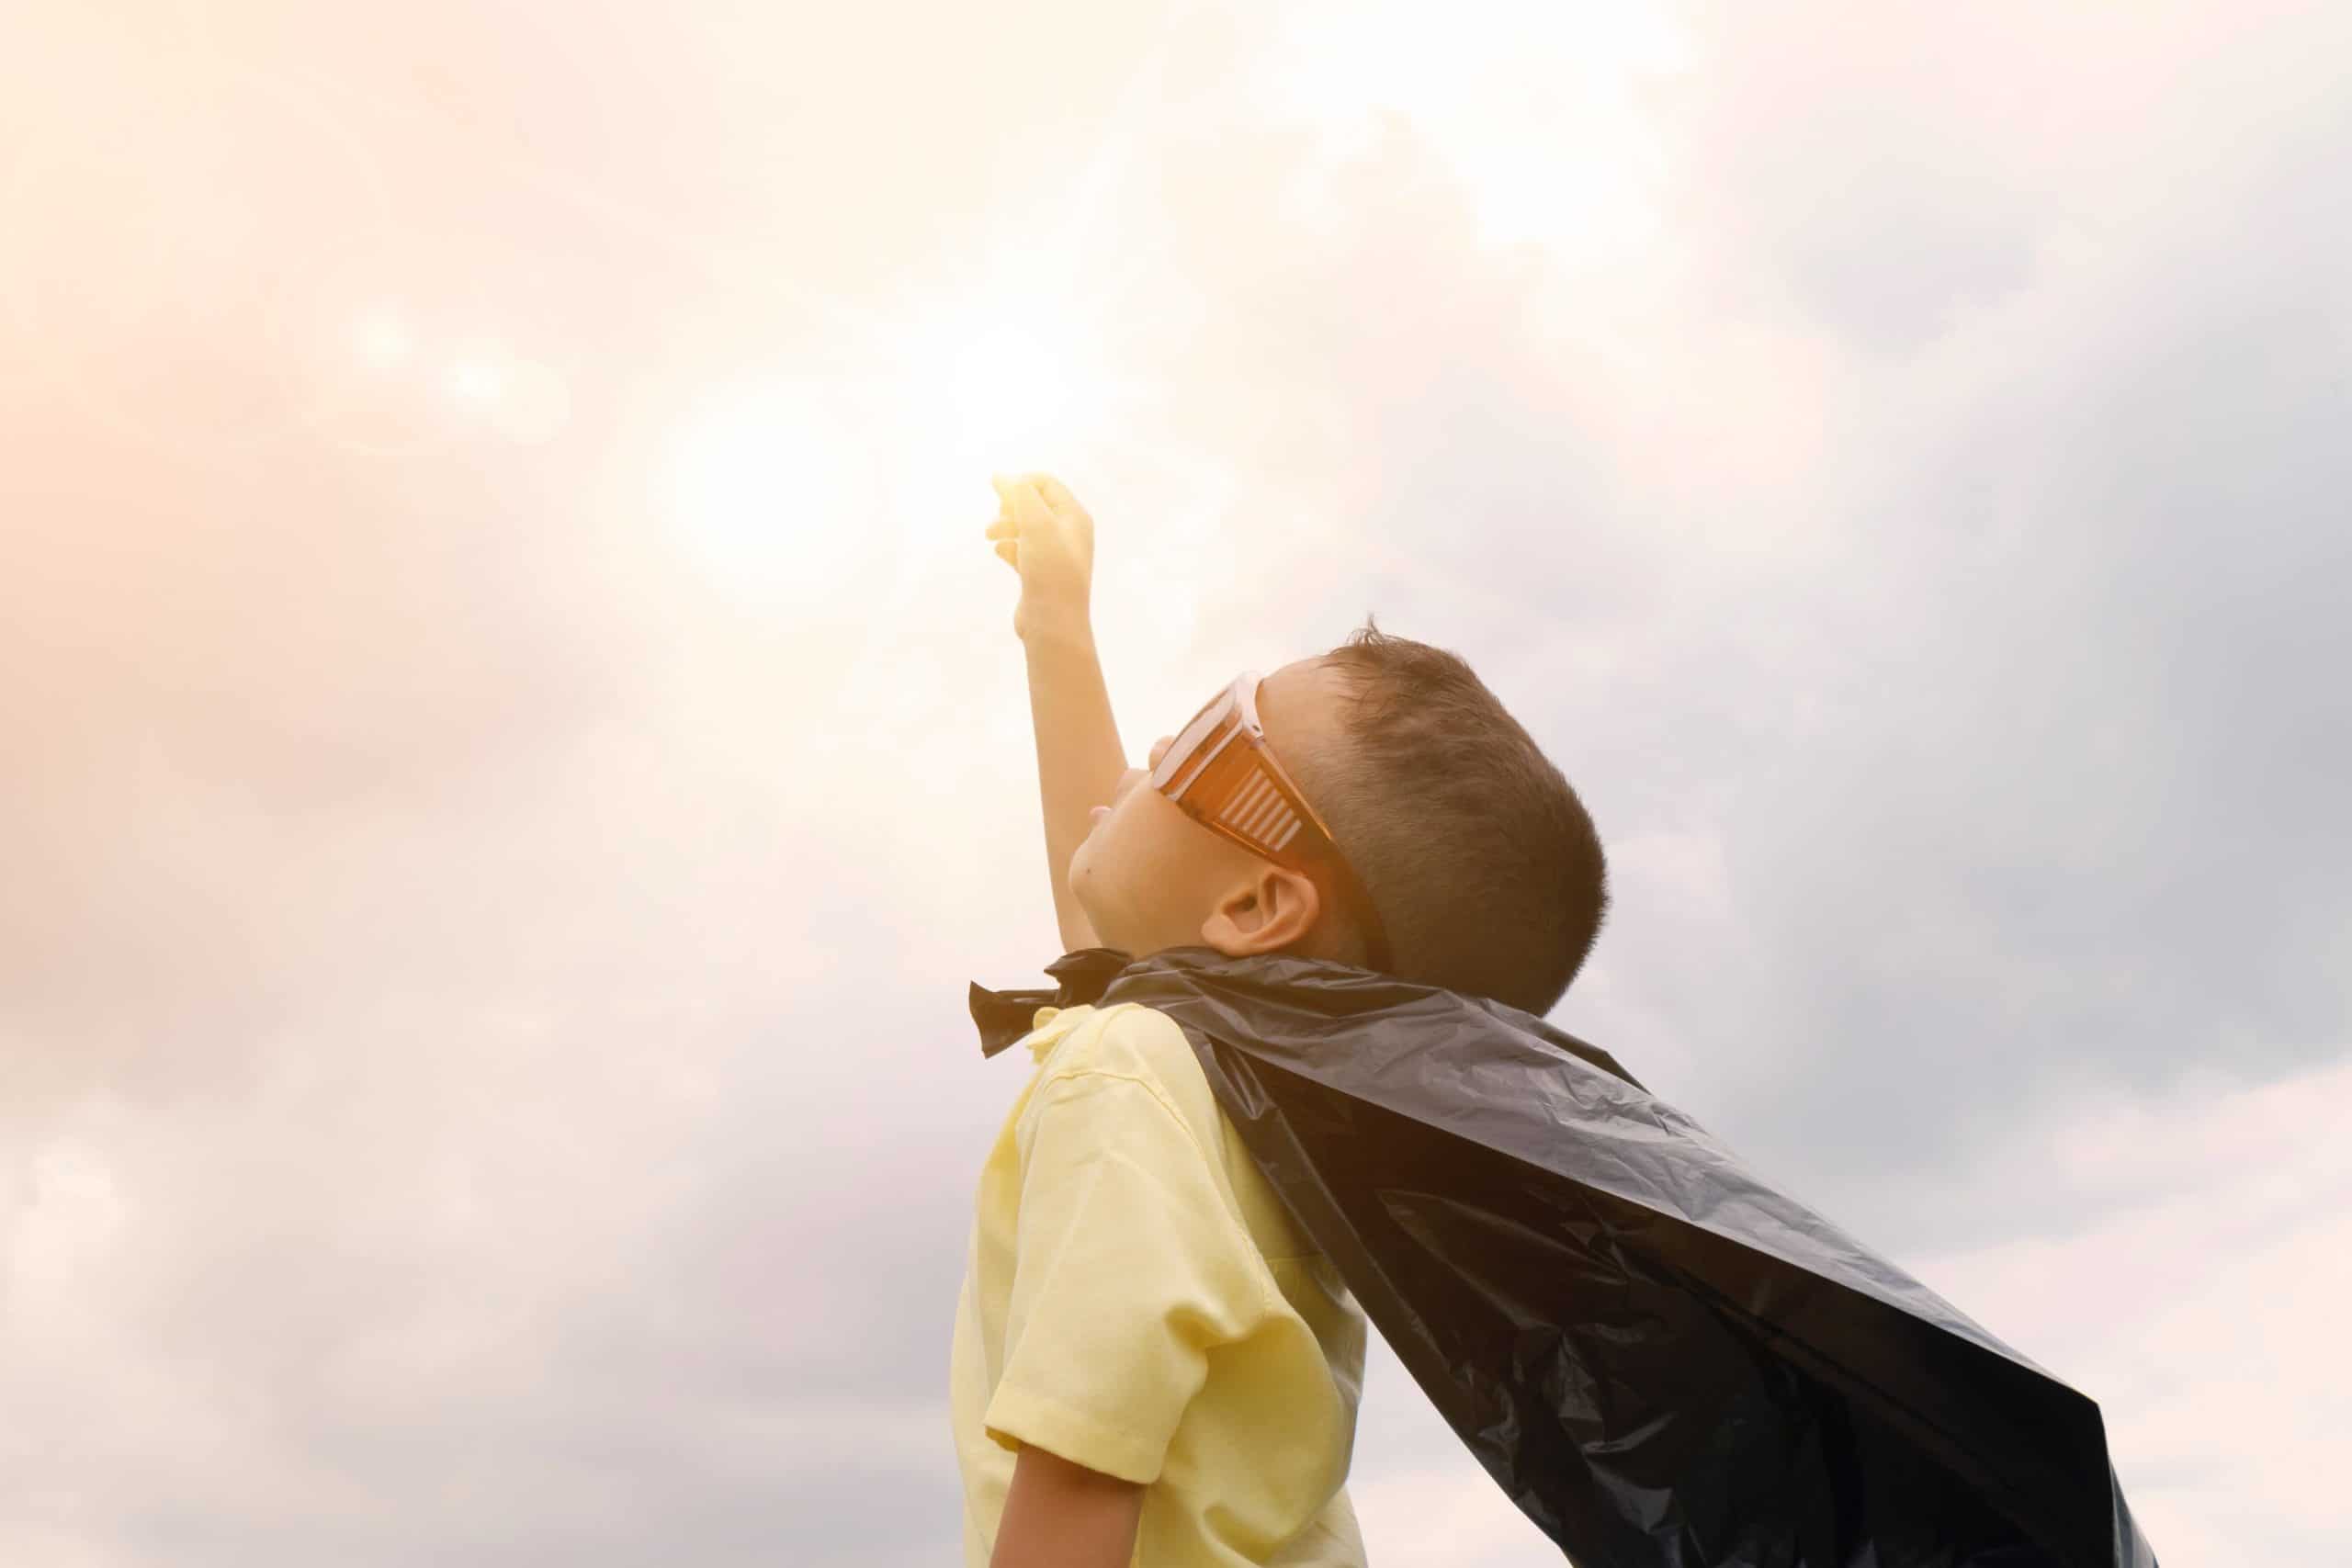 A child engaging in imaginative play as a superhero